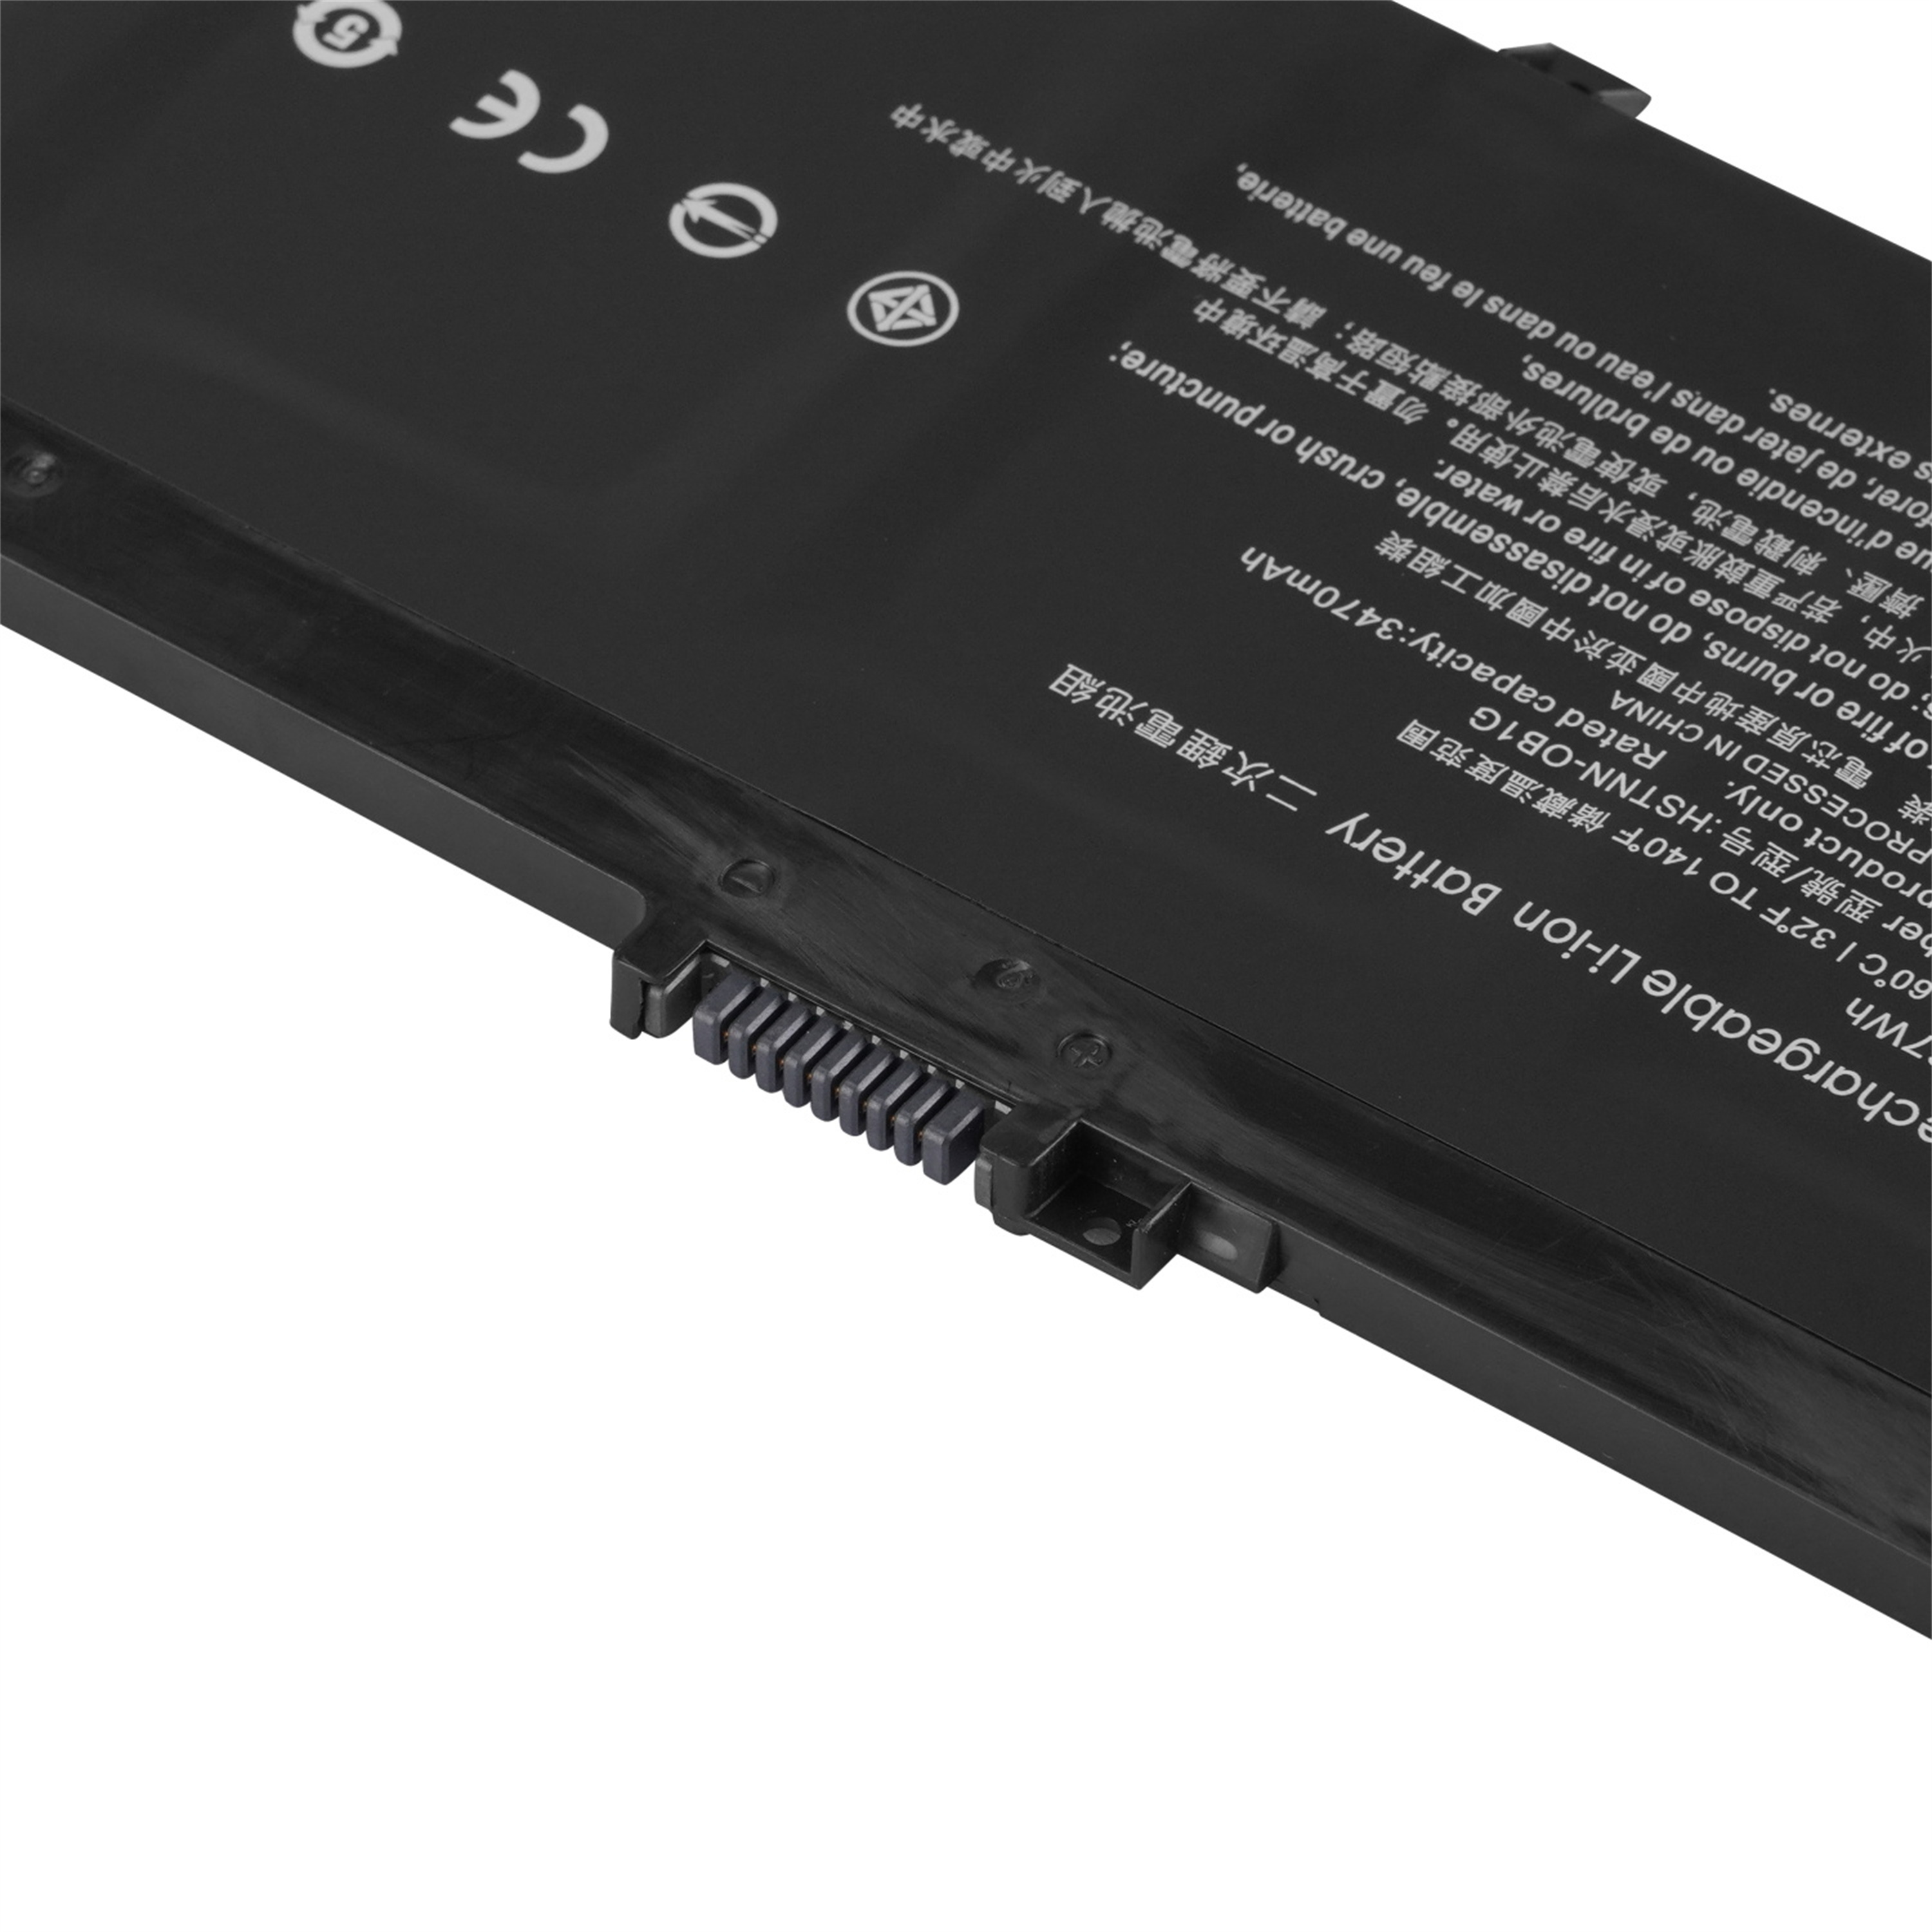 SA04XL rechargeable lithium ion Notebook battery Laptop battery For HP HSTNN-OB1F HSTNN-OB1G L43248-AC1 L43248-AC2 Series 15.12V 5567MAH 